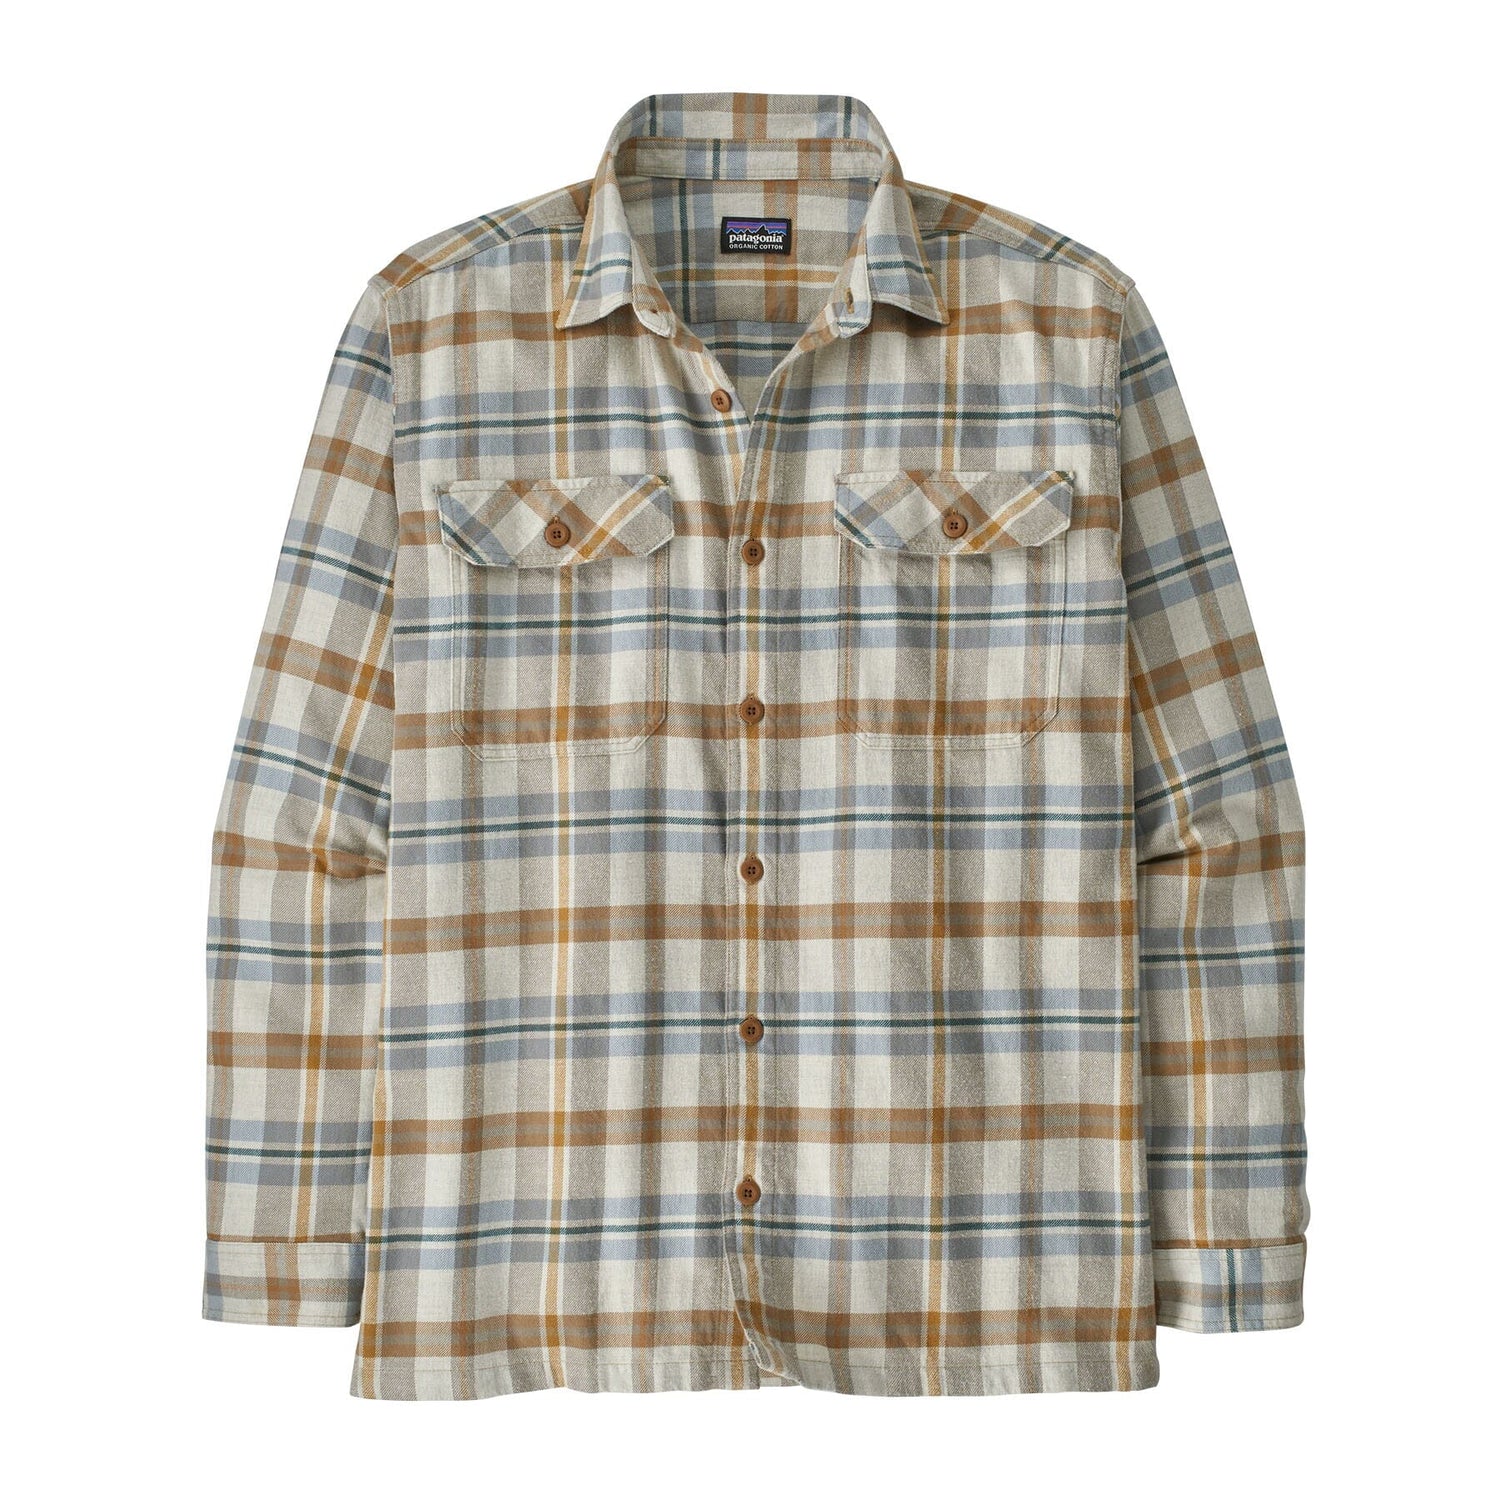 Patagonia - M's Long-Sleeved Midweight Fjord Flannel Shirt - Organic Cotton - Weekendbee - sustainable sportswear